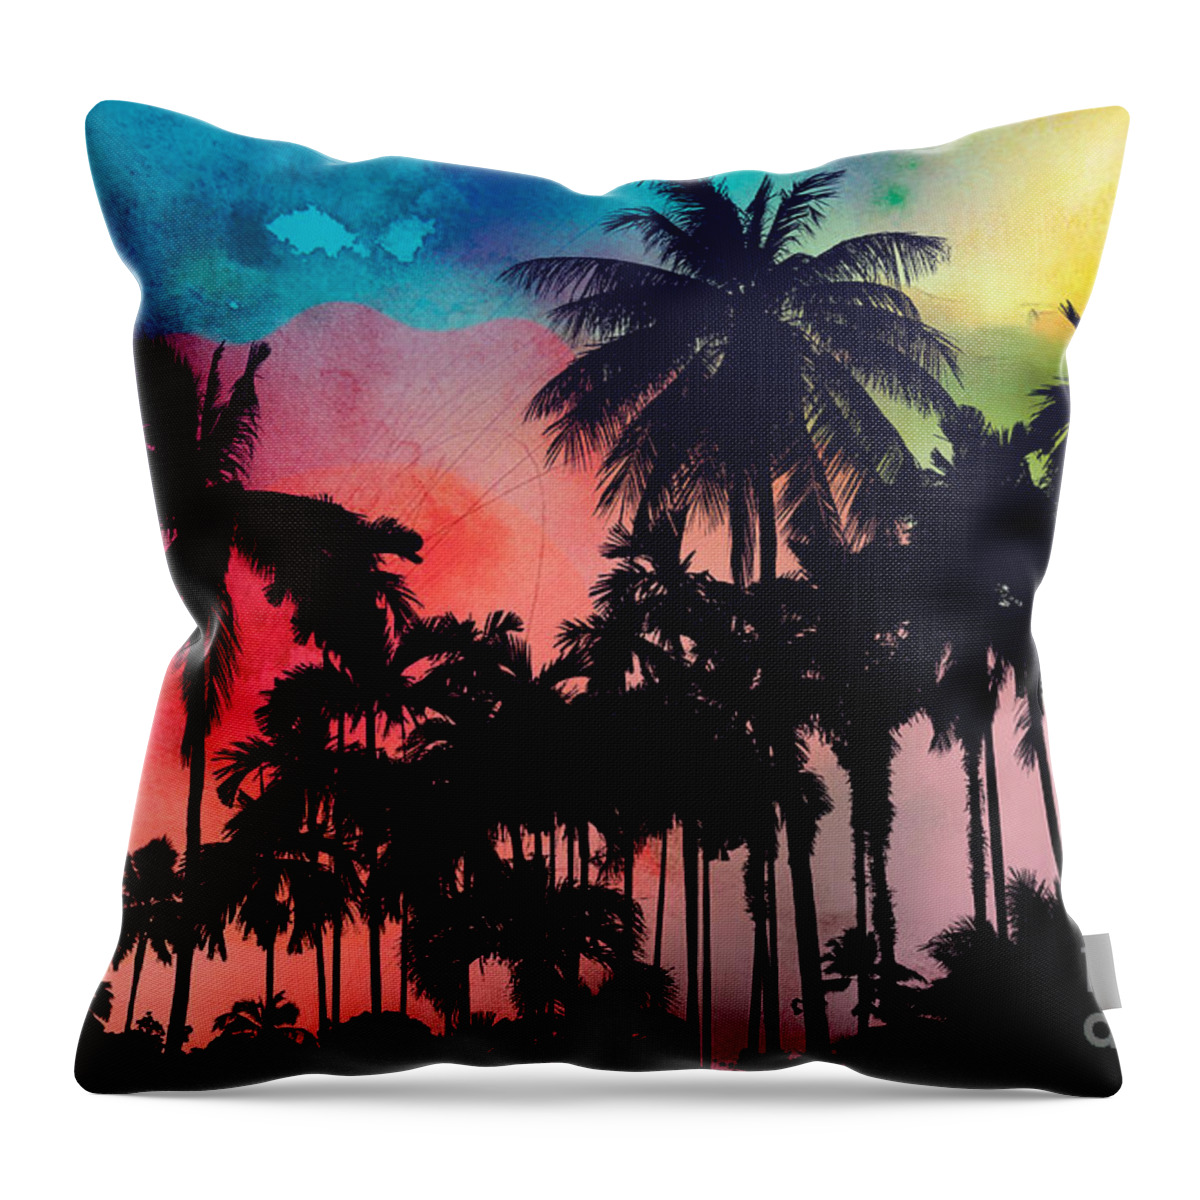 Summer Throw Pillow featuring the painting Tropical Colors by Mark Ashkenazi